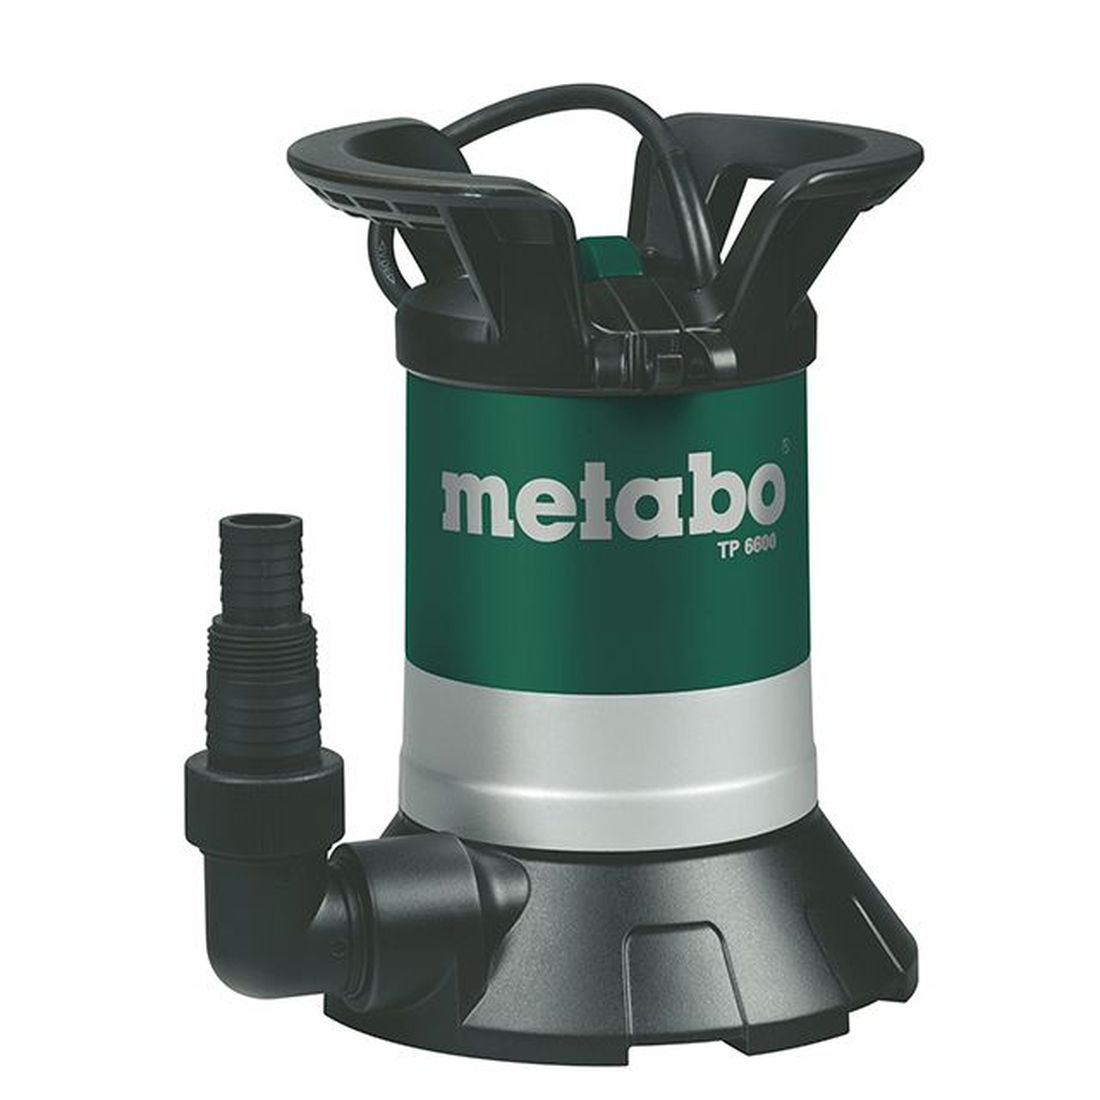 Metabo TP 6600 Clear Water Submersible Pump 250W 240V                                  